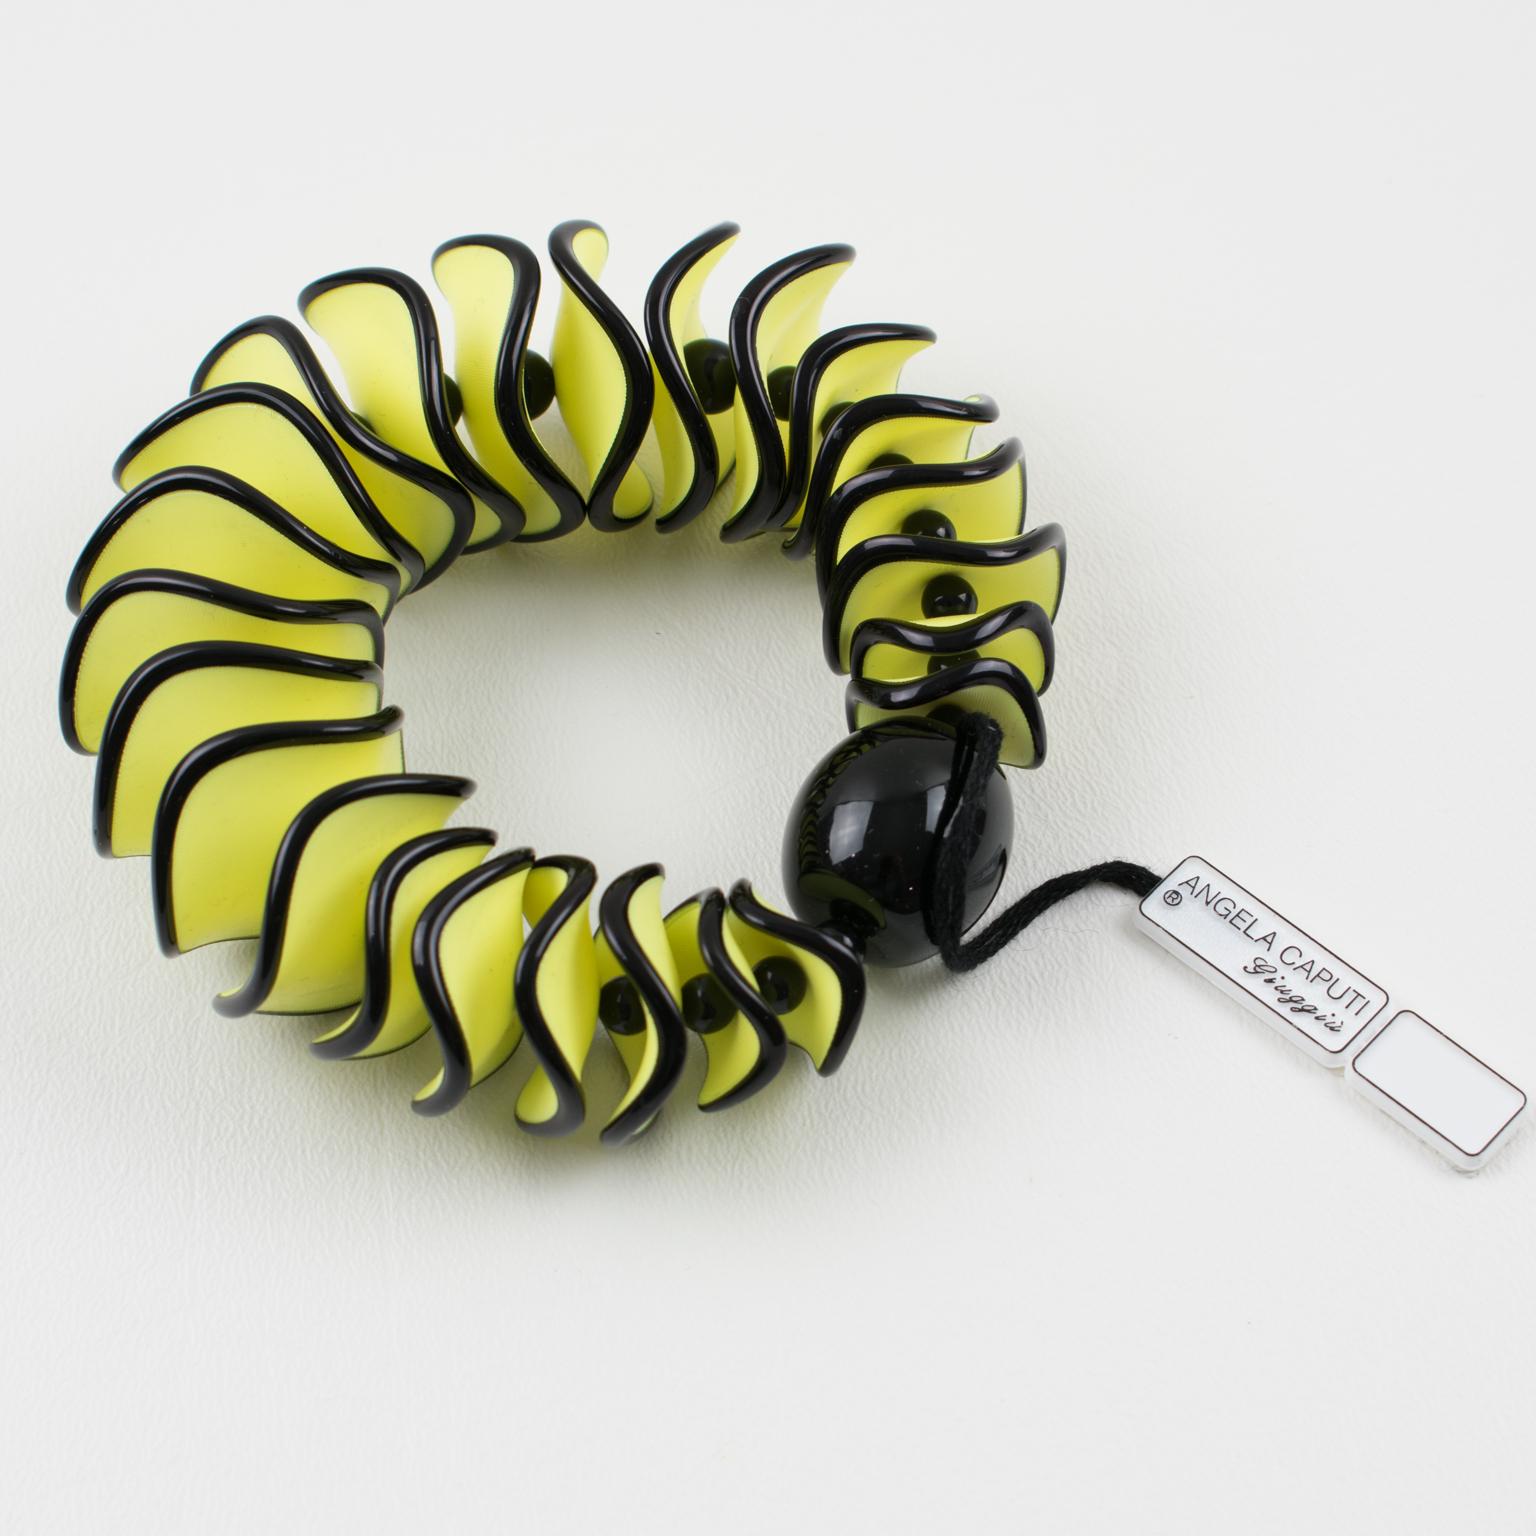 Stunning Angela Caputi, made in Italy resin bracelet. Oversized stretch design with vanilla yellow and black colors dimensional elements in a wavy shape with large central black bead, from the Flamenco collection. Her matching of colors is always